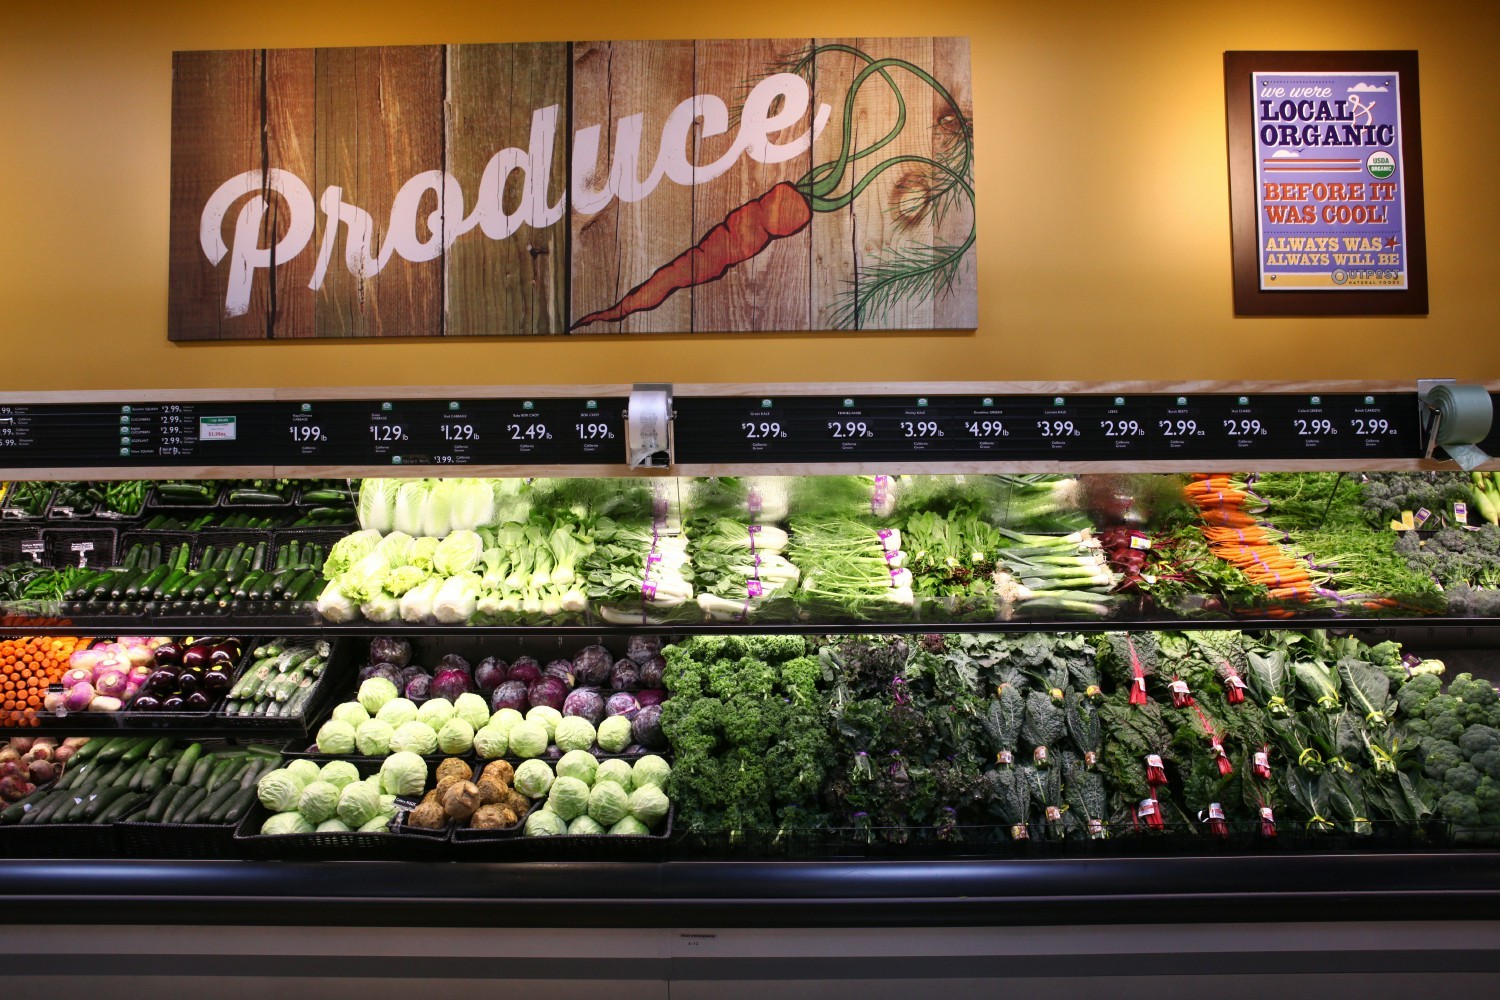 We take pride in our fresh organic Produce!